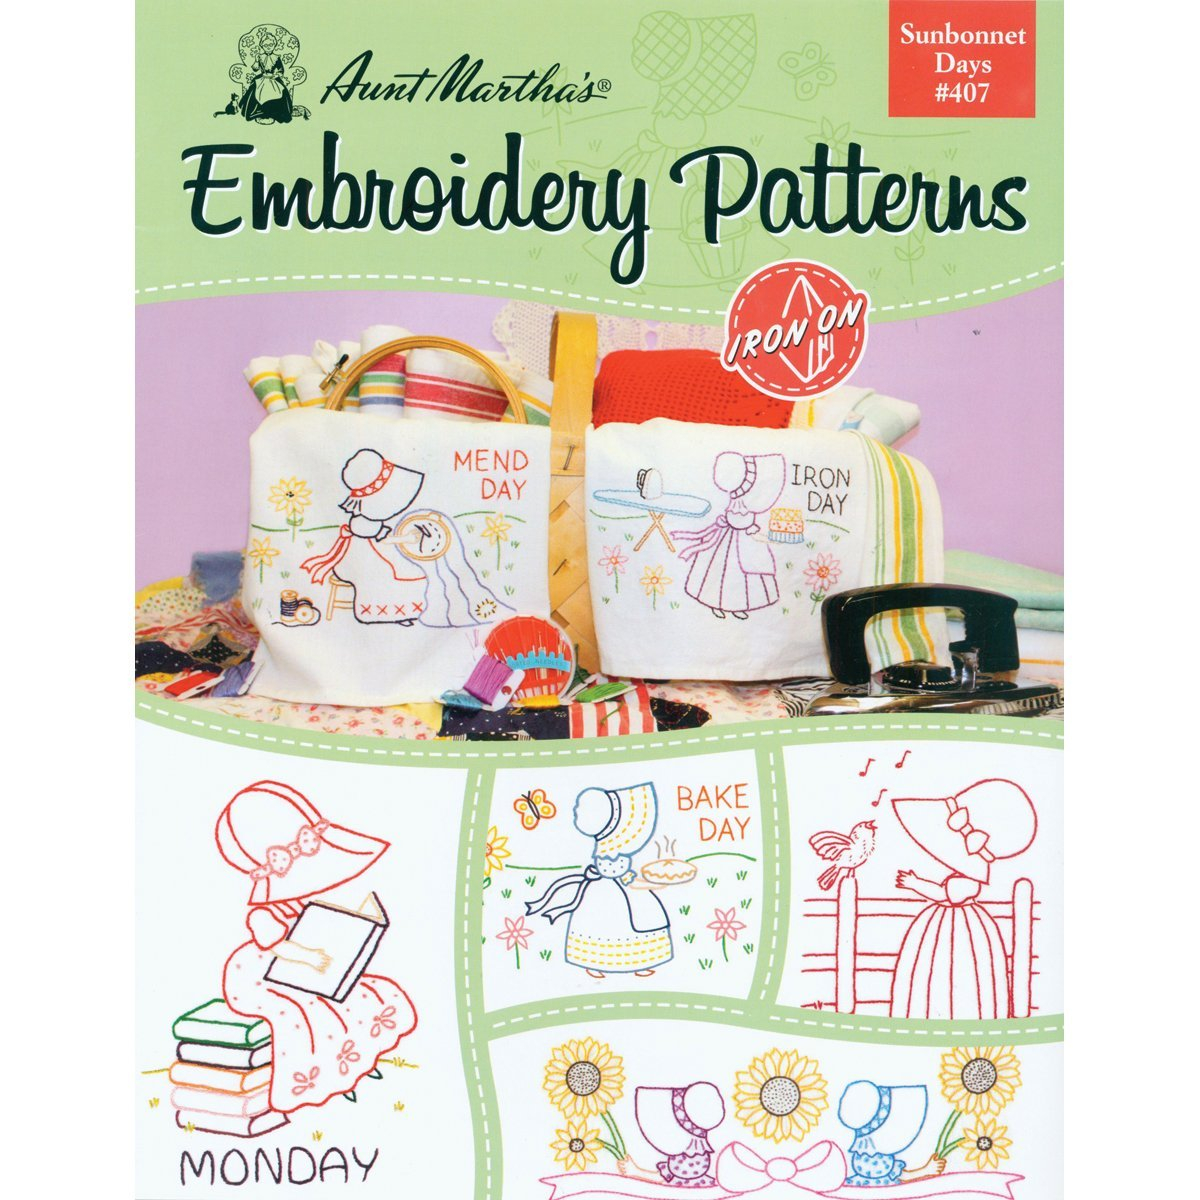 Hand Embroidery Patterns Transfers Aunt Marthas Sunbonnet Days Embroidery Transfer Pattern Book Kit Designs Include Various Sunbonnet Girl Designs As Well As 2 Pillowcase Hem